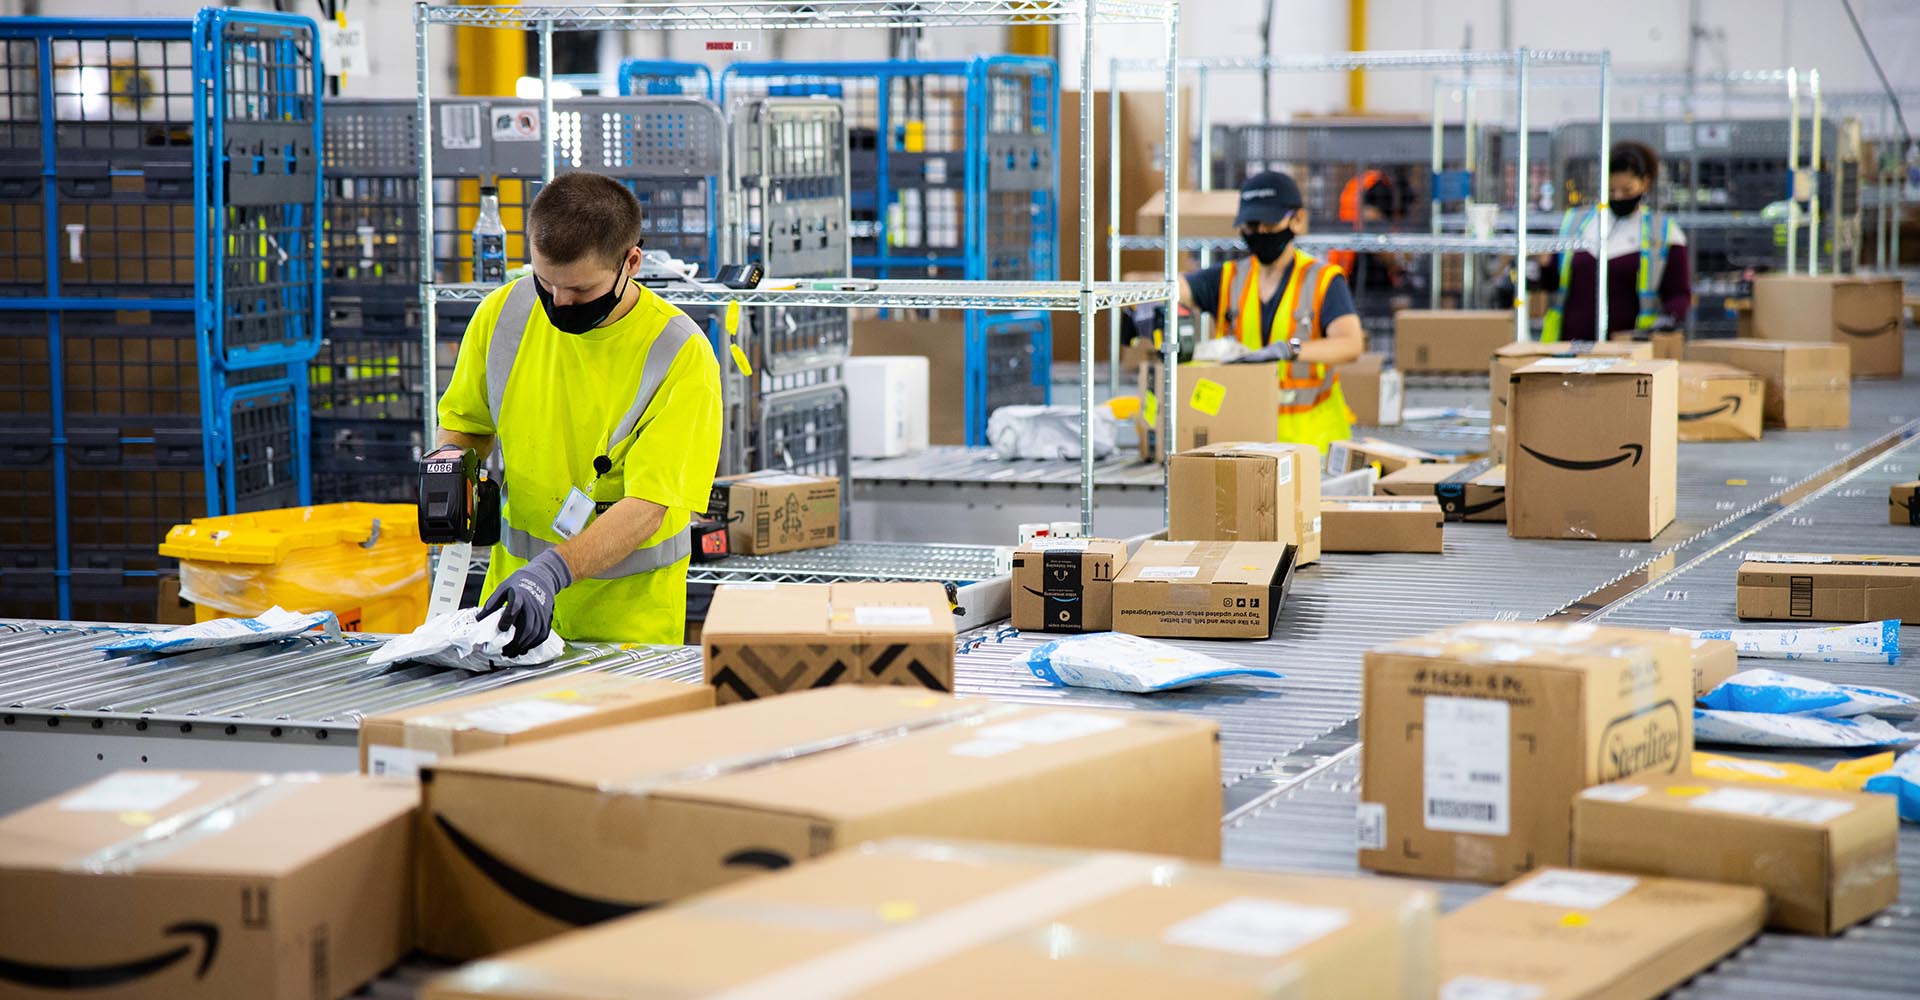 Amazon workers handle packages at a distribution warehouse